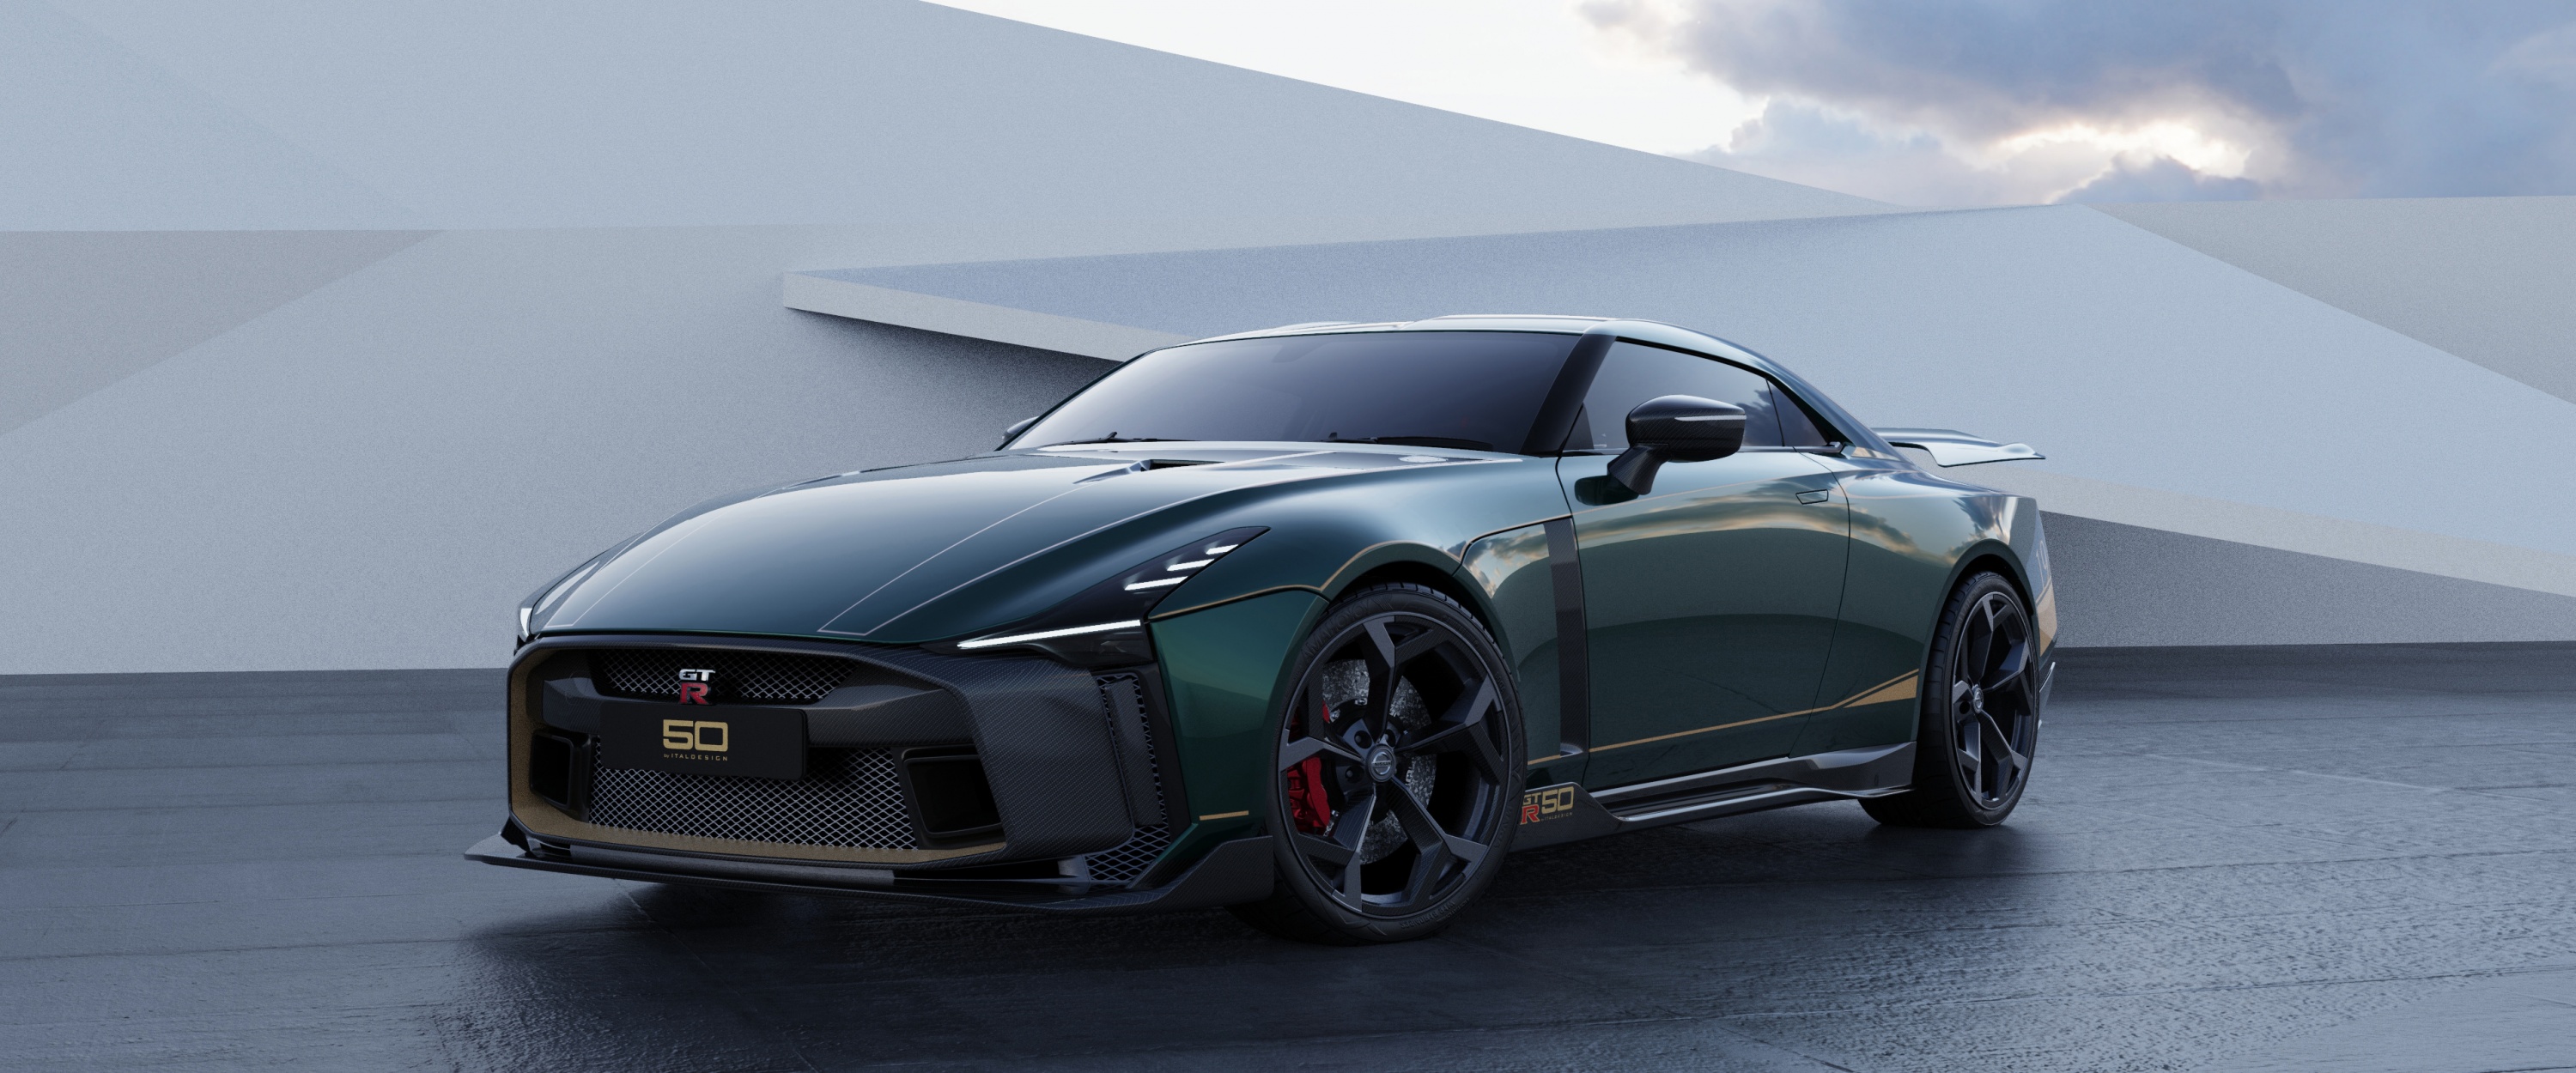 Nissan GT-R50 by Italdesign production rendering Green FR34-source.jpg